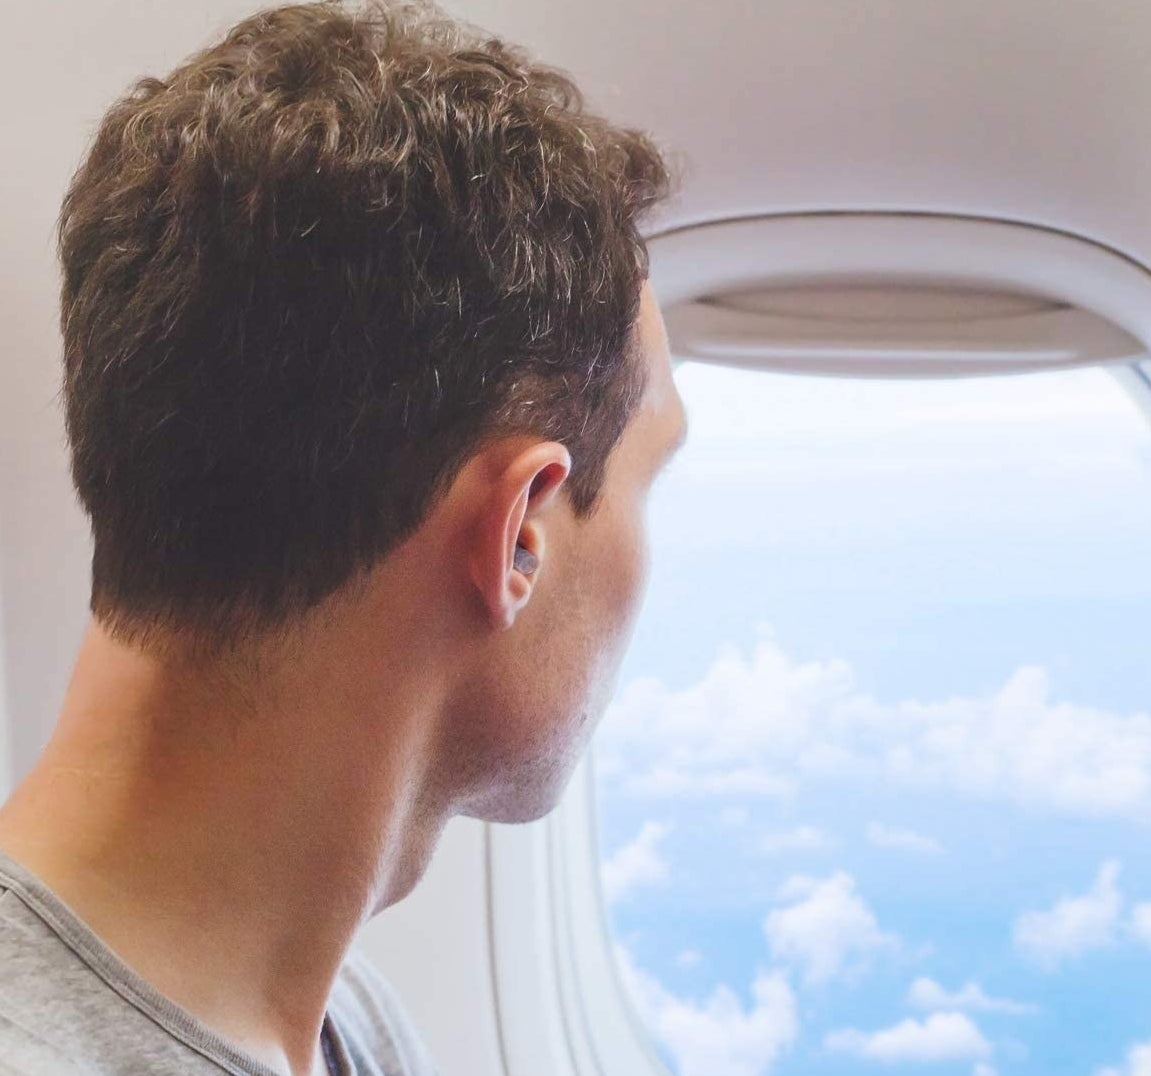 Someone wearing the earplugs on a plane while looking out the window